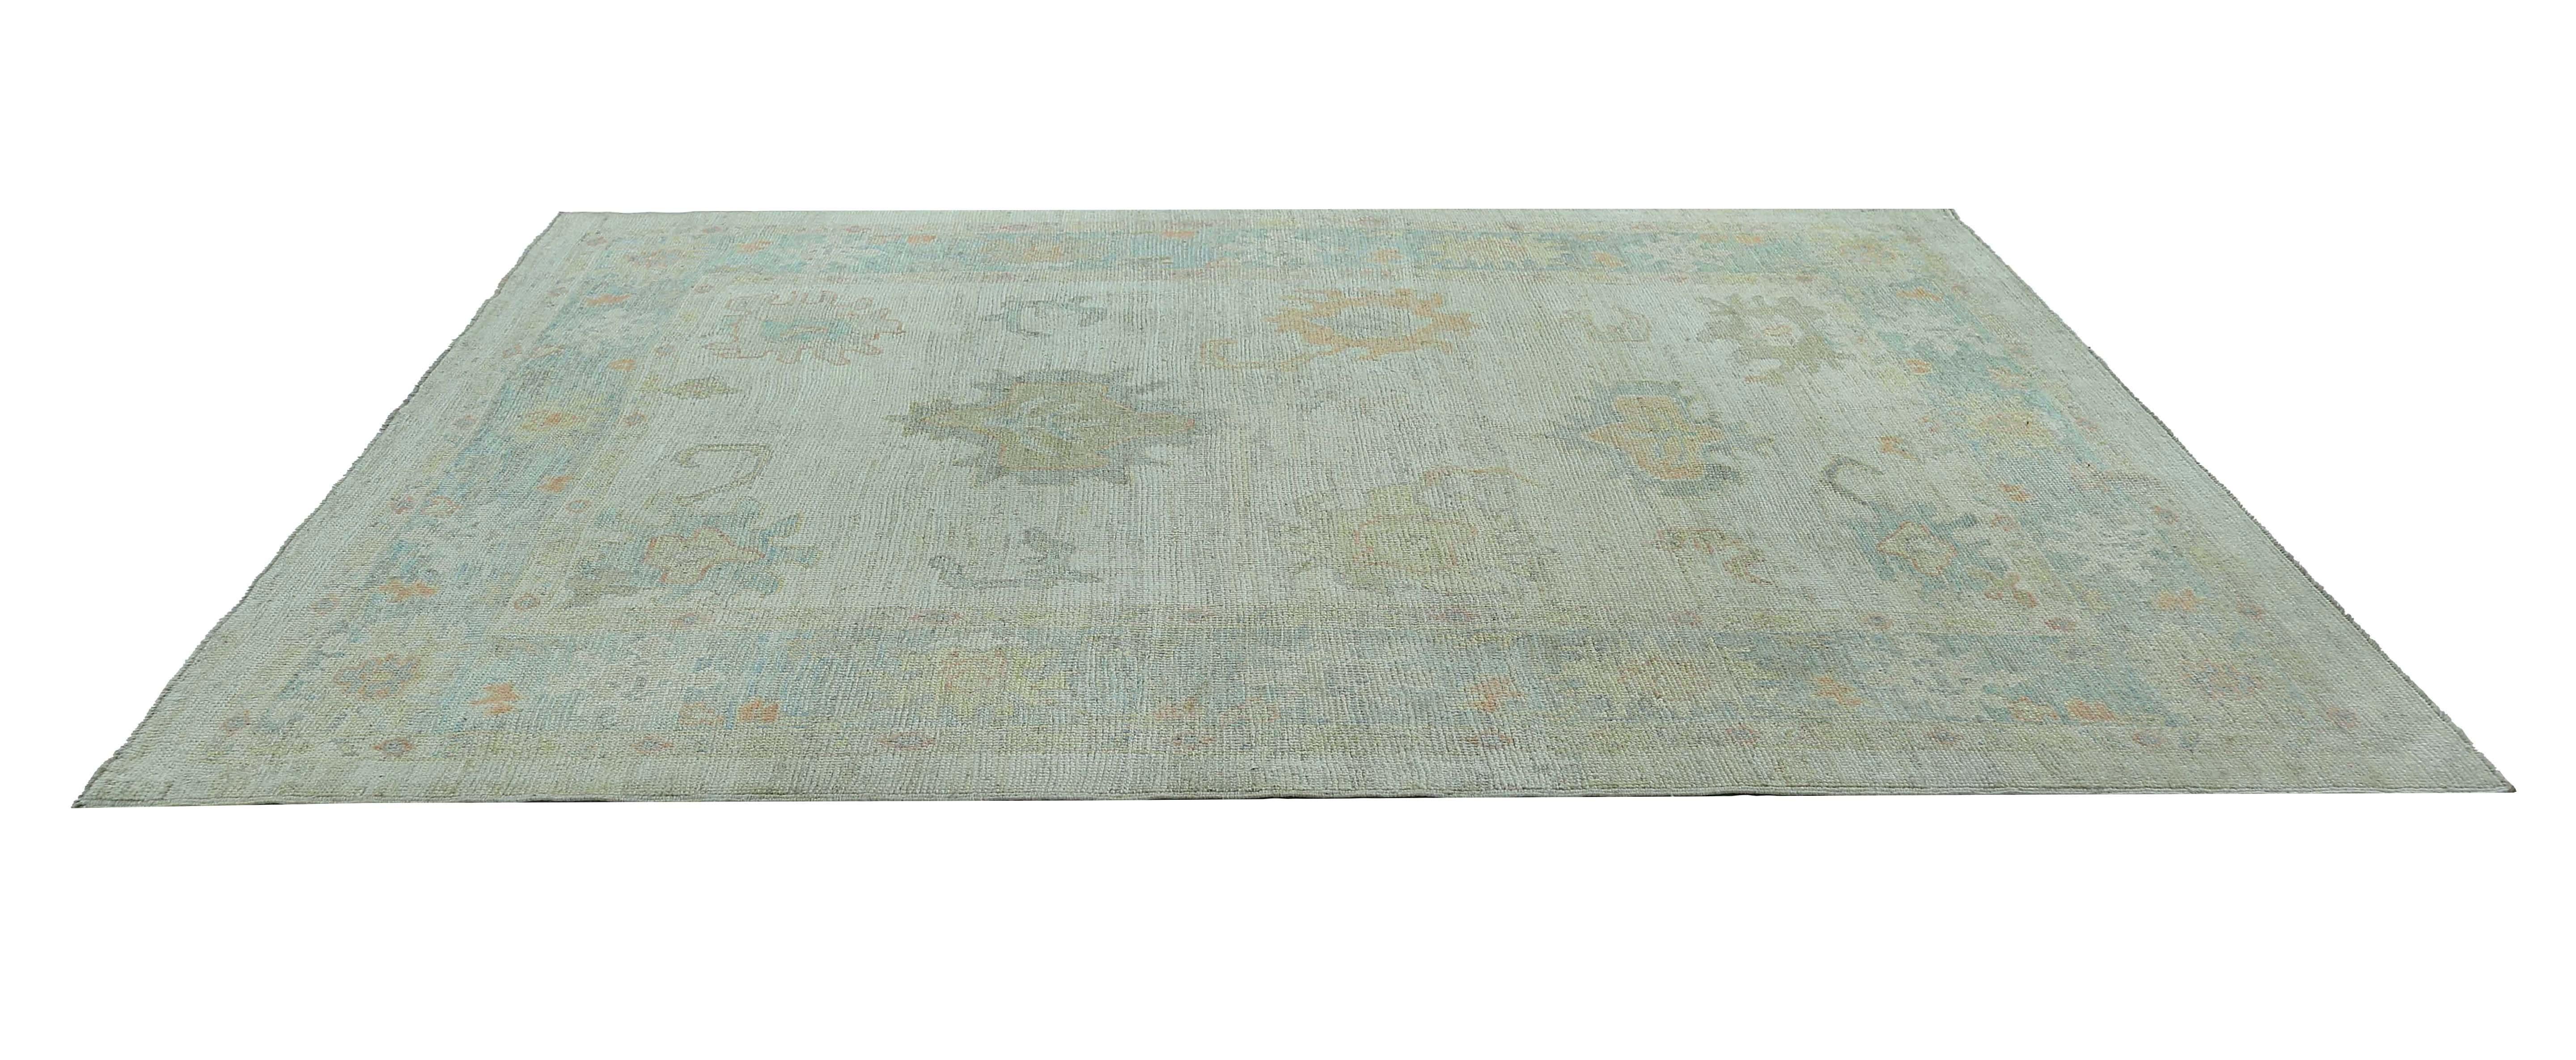 Elevate your home decor with our exquisite 6'8'' x 9'7'' Oushak rug, featuring a stunning array of blue tones that create a mesmerizing effect. This rug is handwoven from premium quality wool, providing a soft and comfortable underfoot experience